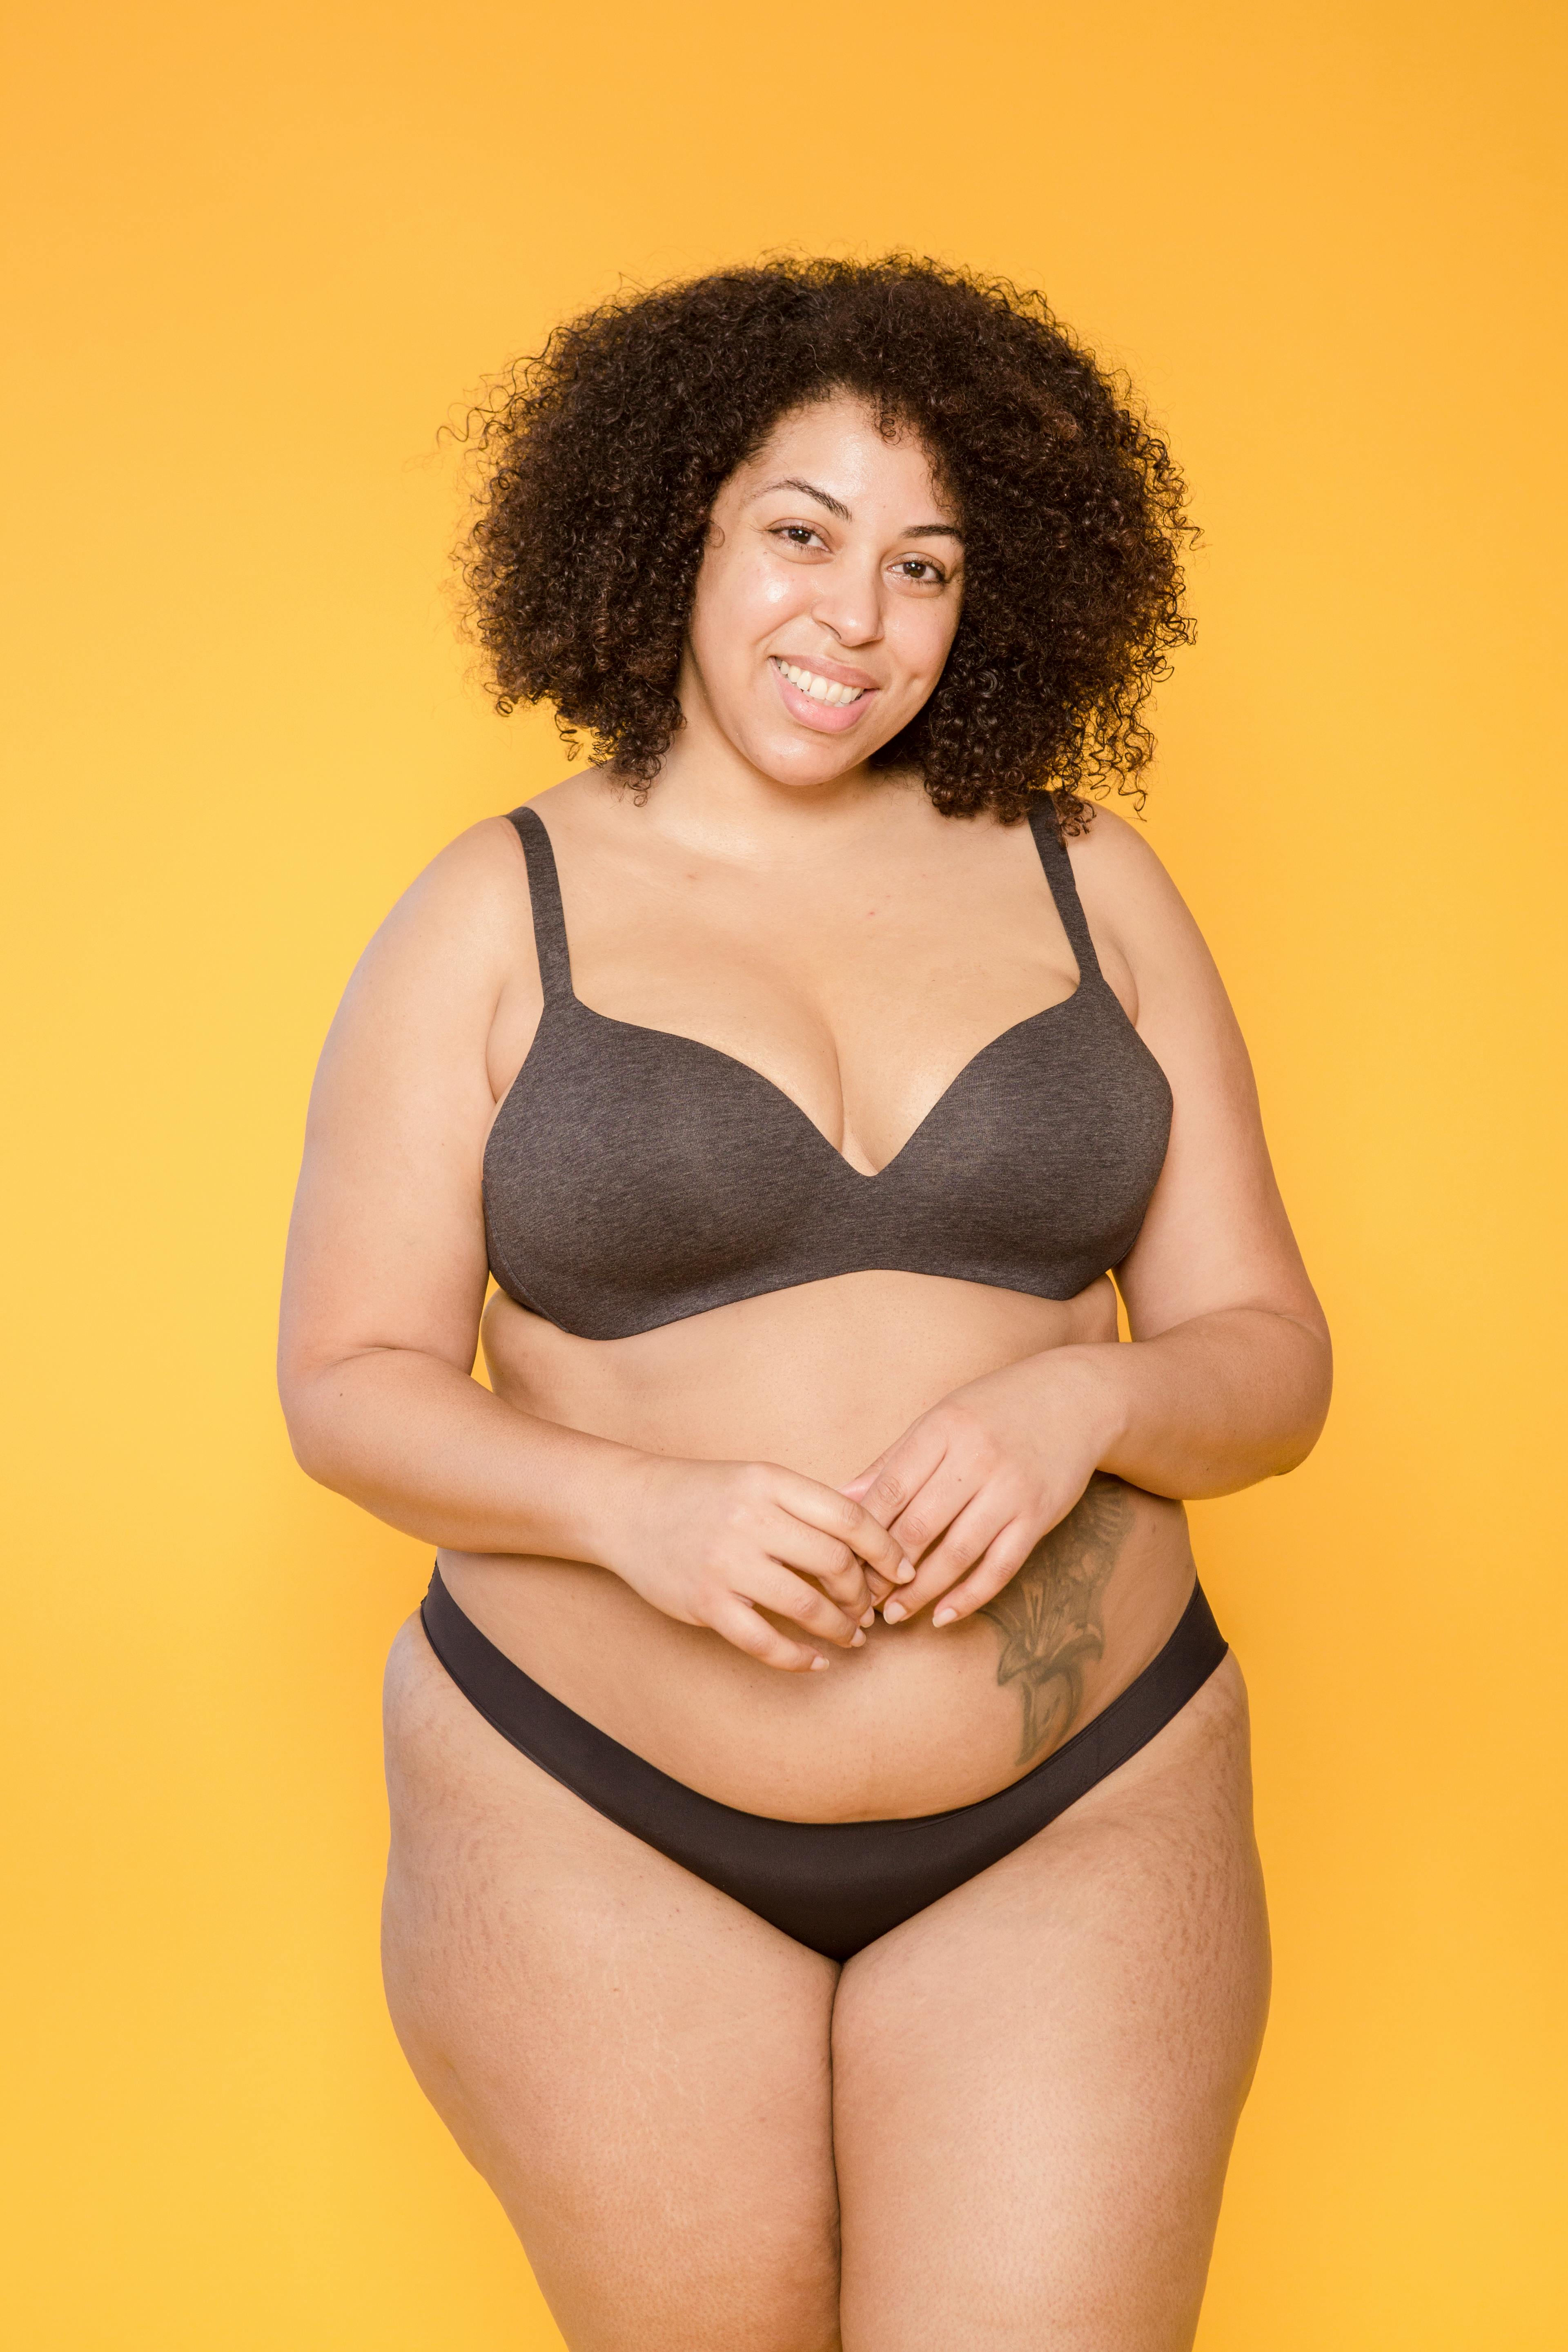 Smiling plump ethnic model in lingerie with tattoo  Free Stock Photo